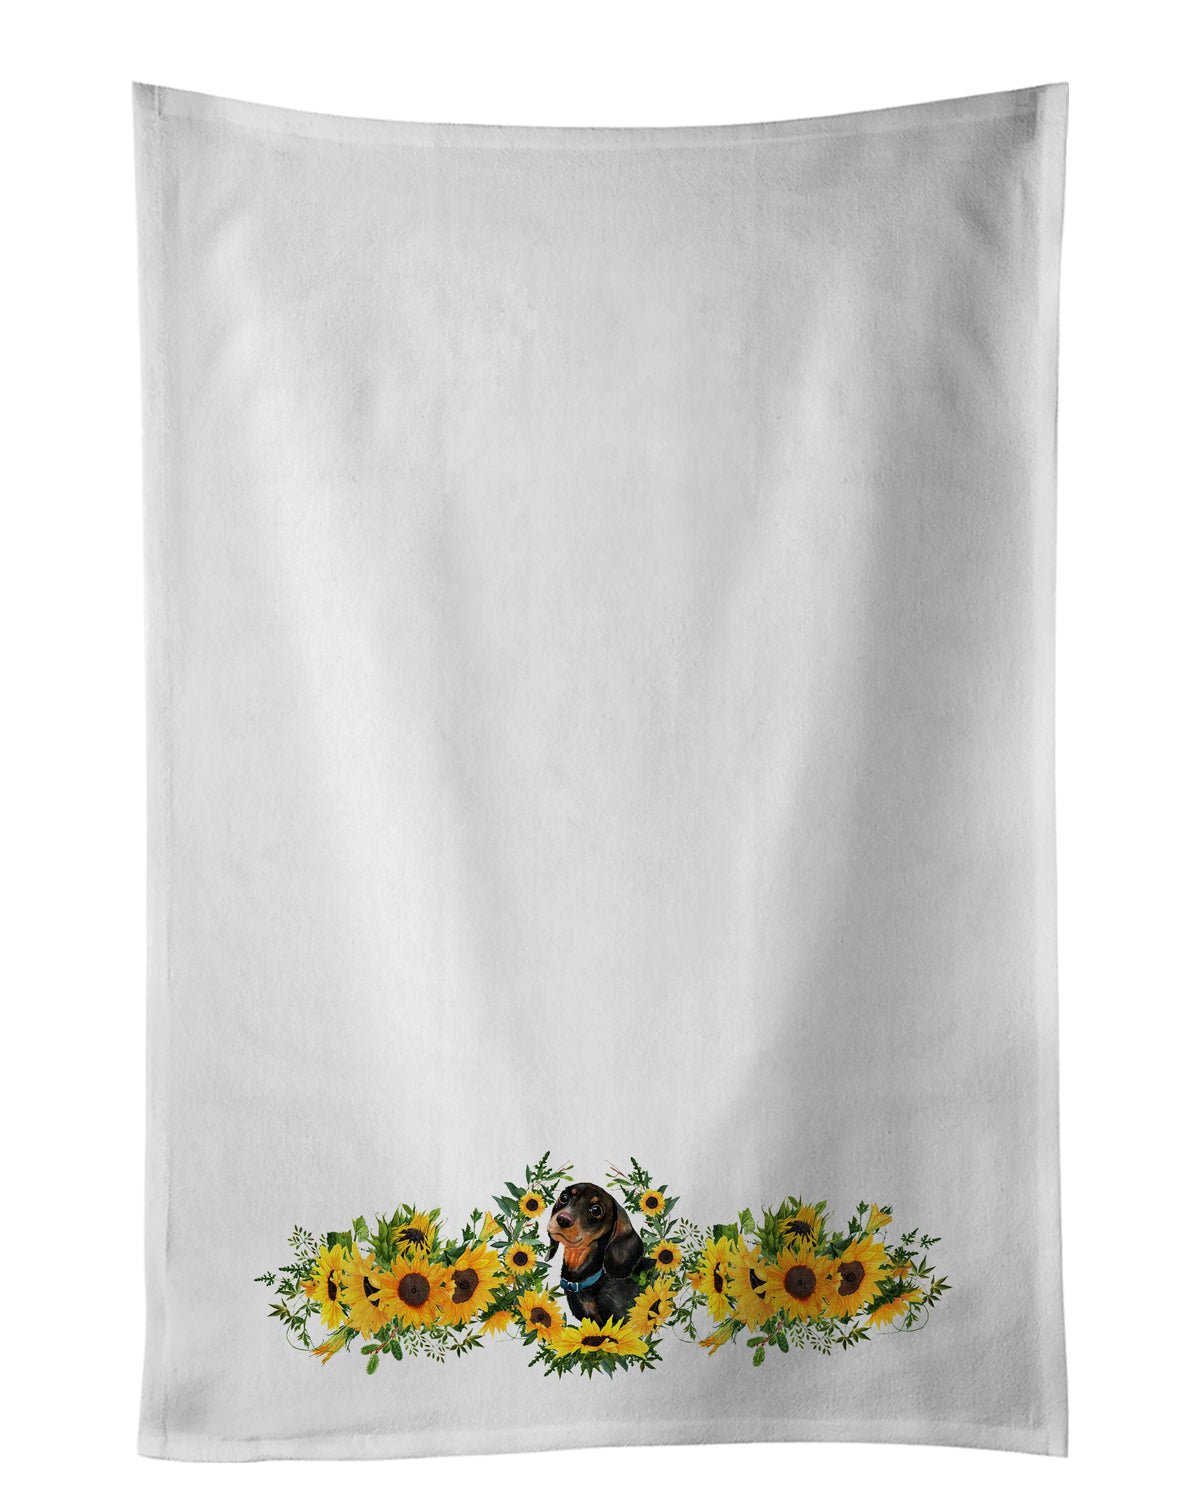 Buy this Black and Tan Dachshund in Sunflowers White Kitchen Towel Set of 2